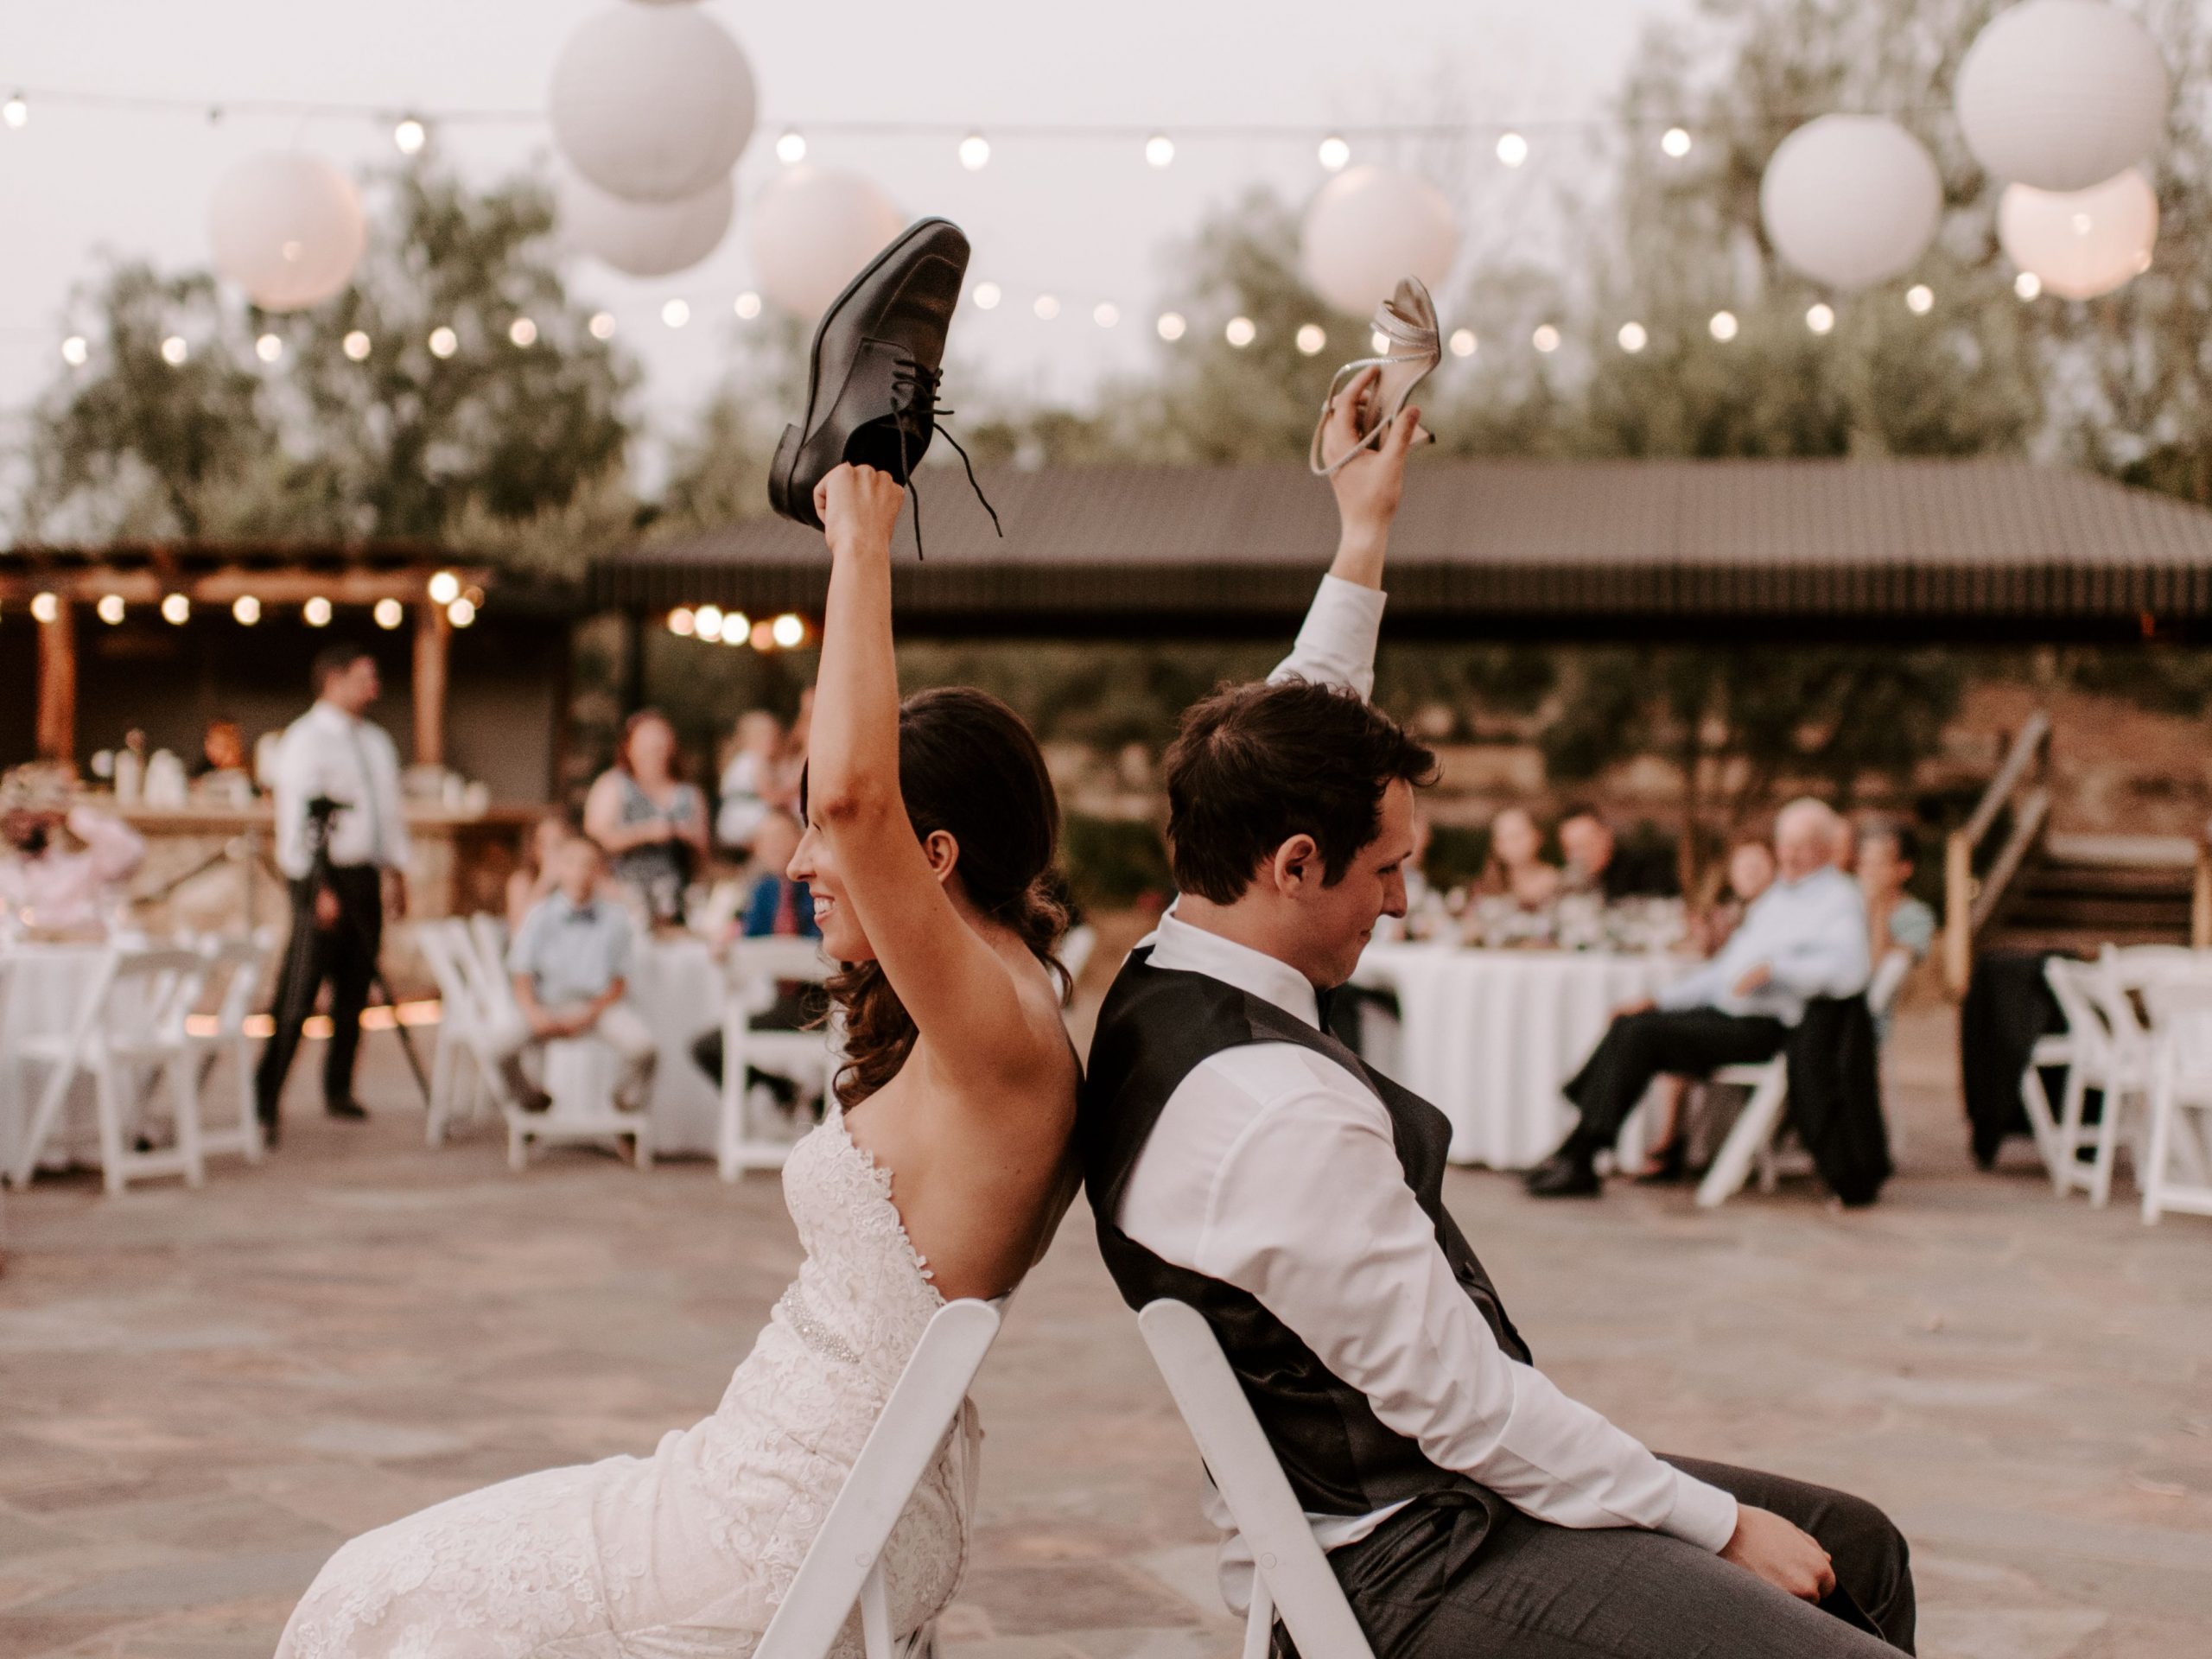 50+ Wedding Shoe Game Questions To Ask - Warble Entertainment